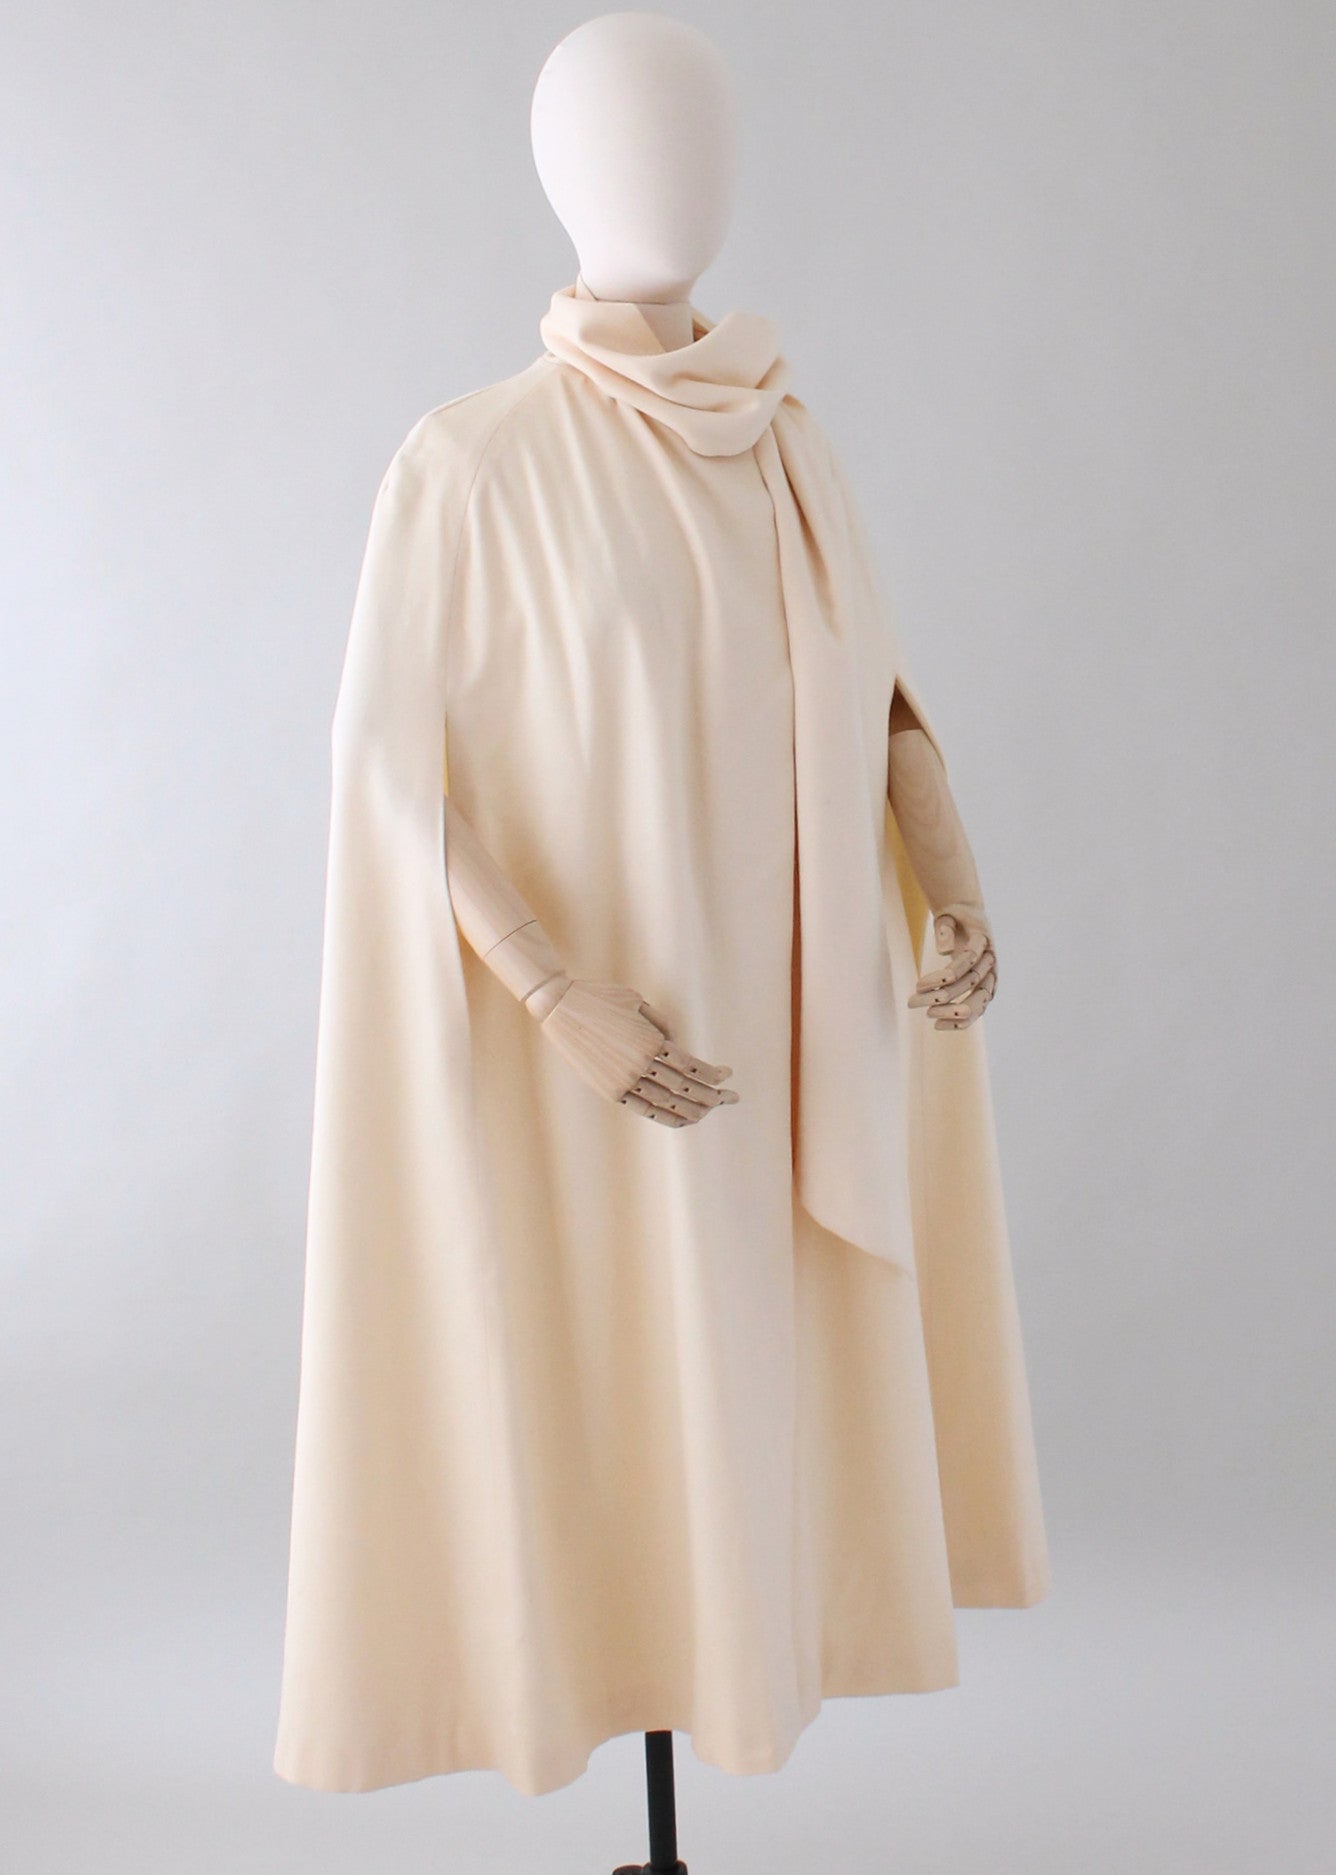 Vintage 1970s Winter White Long Cape - Raleigh Vintage